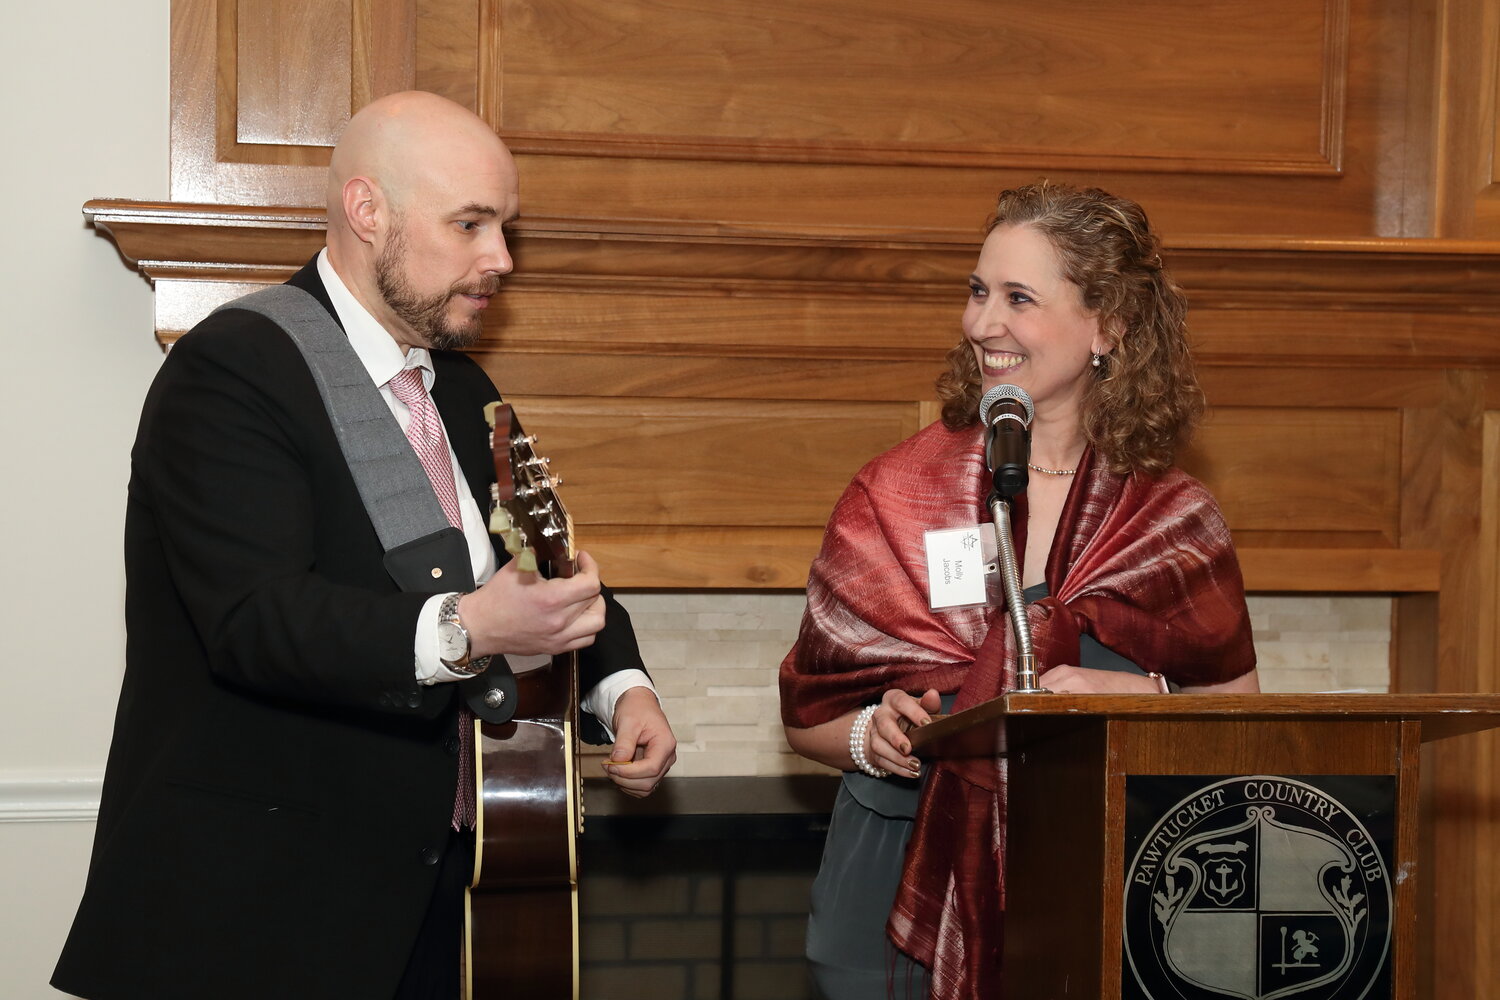 Congregation Agugas Achim president Molly Jacobs (right) sings a Jewish camp song to conclude her remarks, accompanied by member Ken Freeman on guitar.